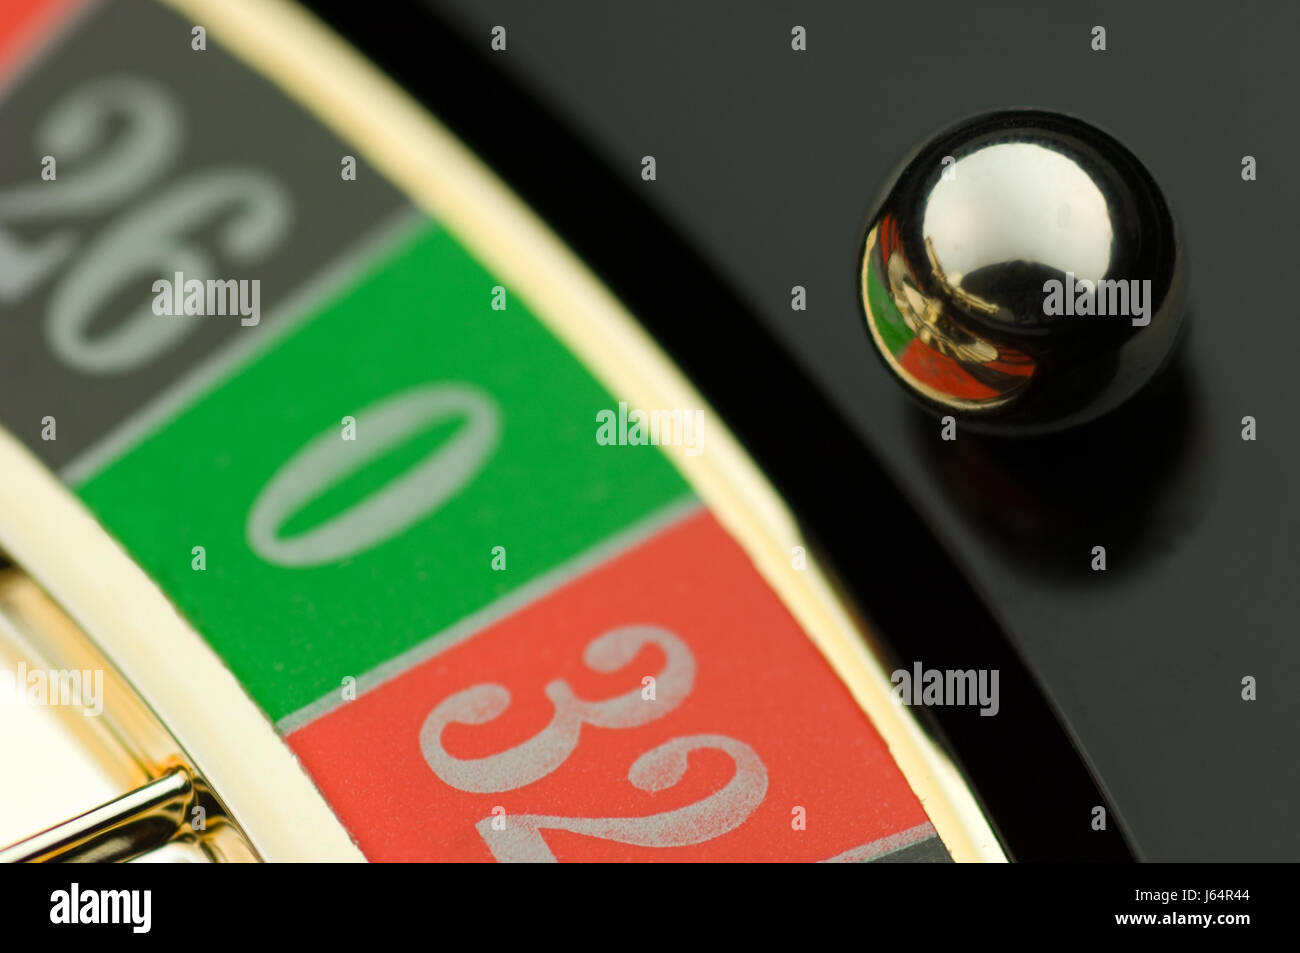 risk casino game of chance gambling roulettes zero lucky luck lose losing Stock Photo